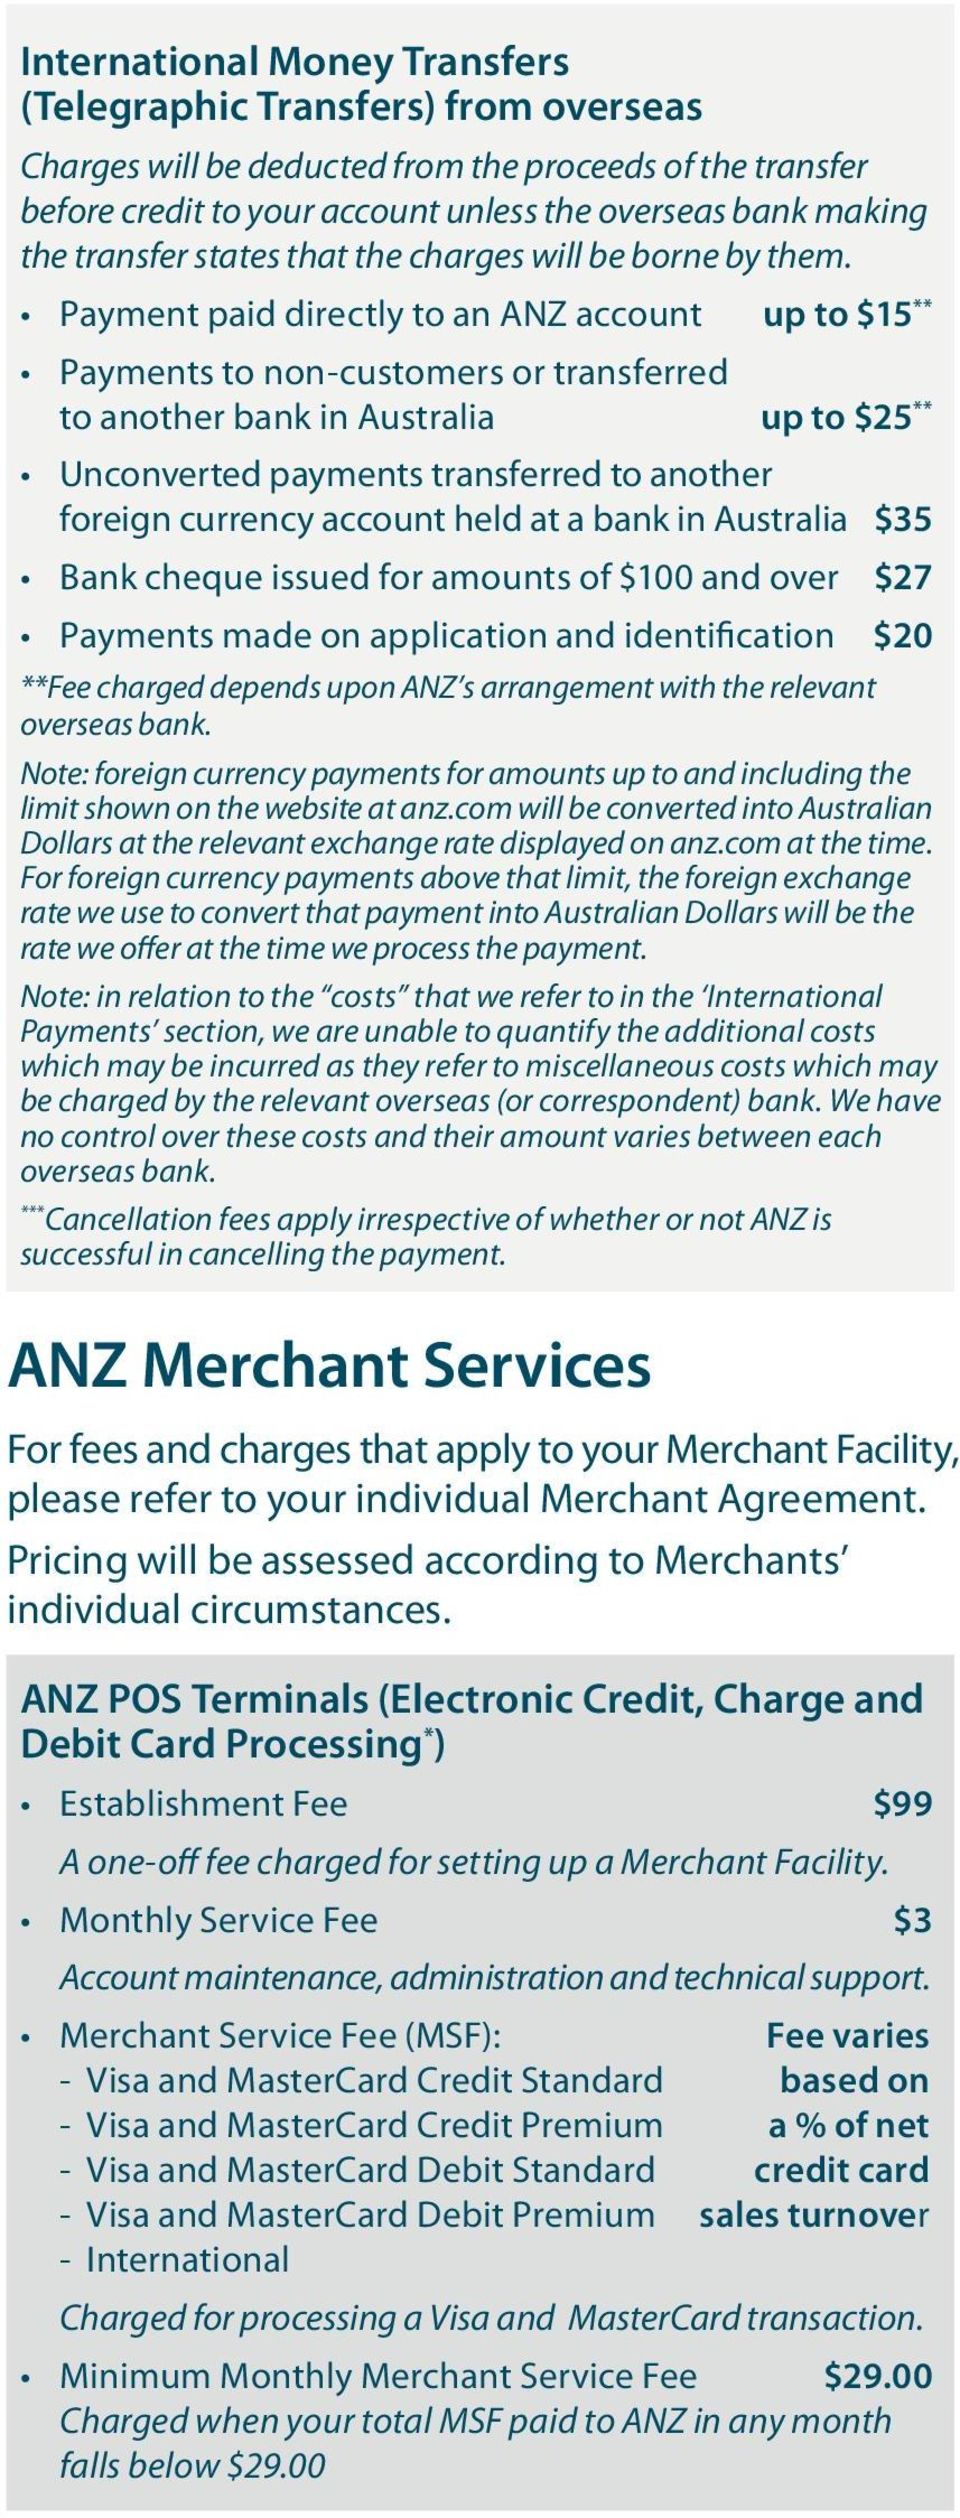 Payment paid directly to an ANZ account up to $15 ** Payments to non-customers or transferred to another bank in Australia up to $25 ** Unconverted payments transferred to another foreign currency